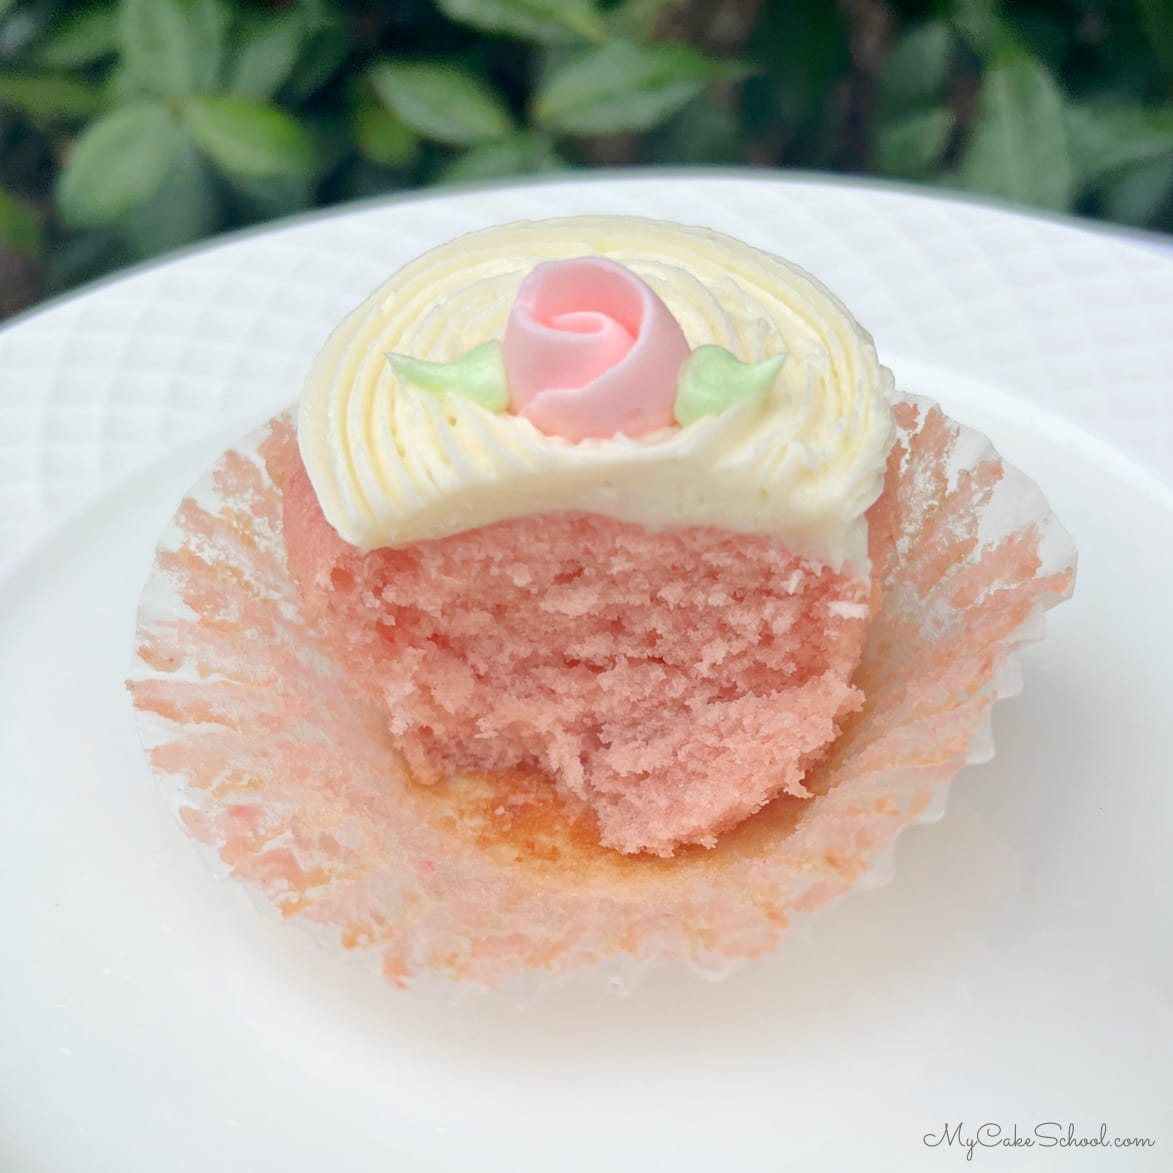 Strawberry Cupcake with liner peeled away.